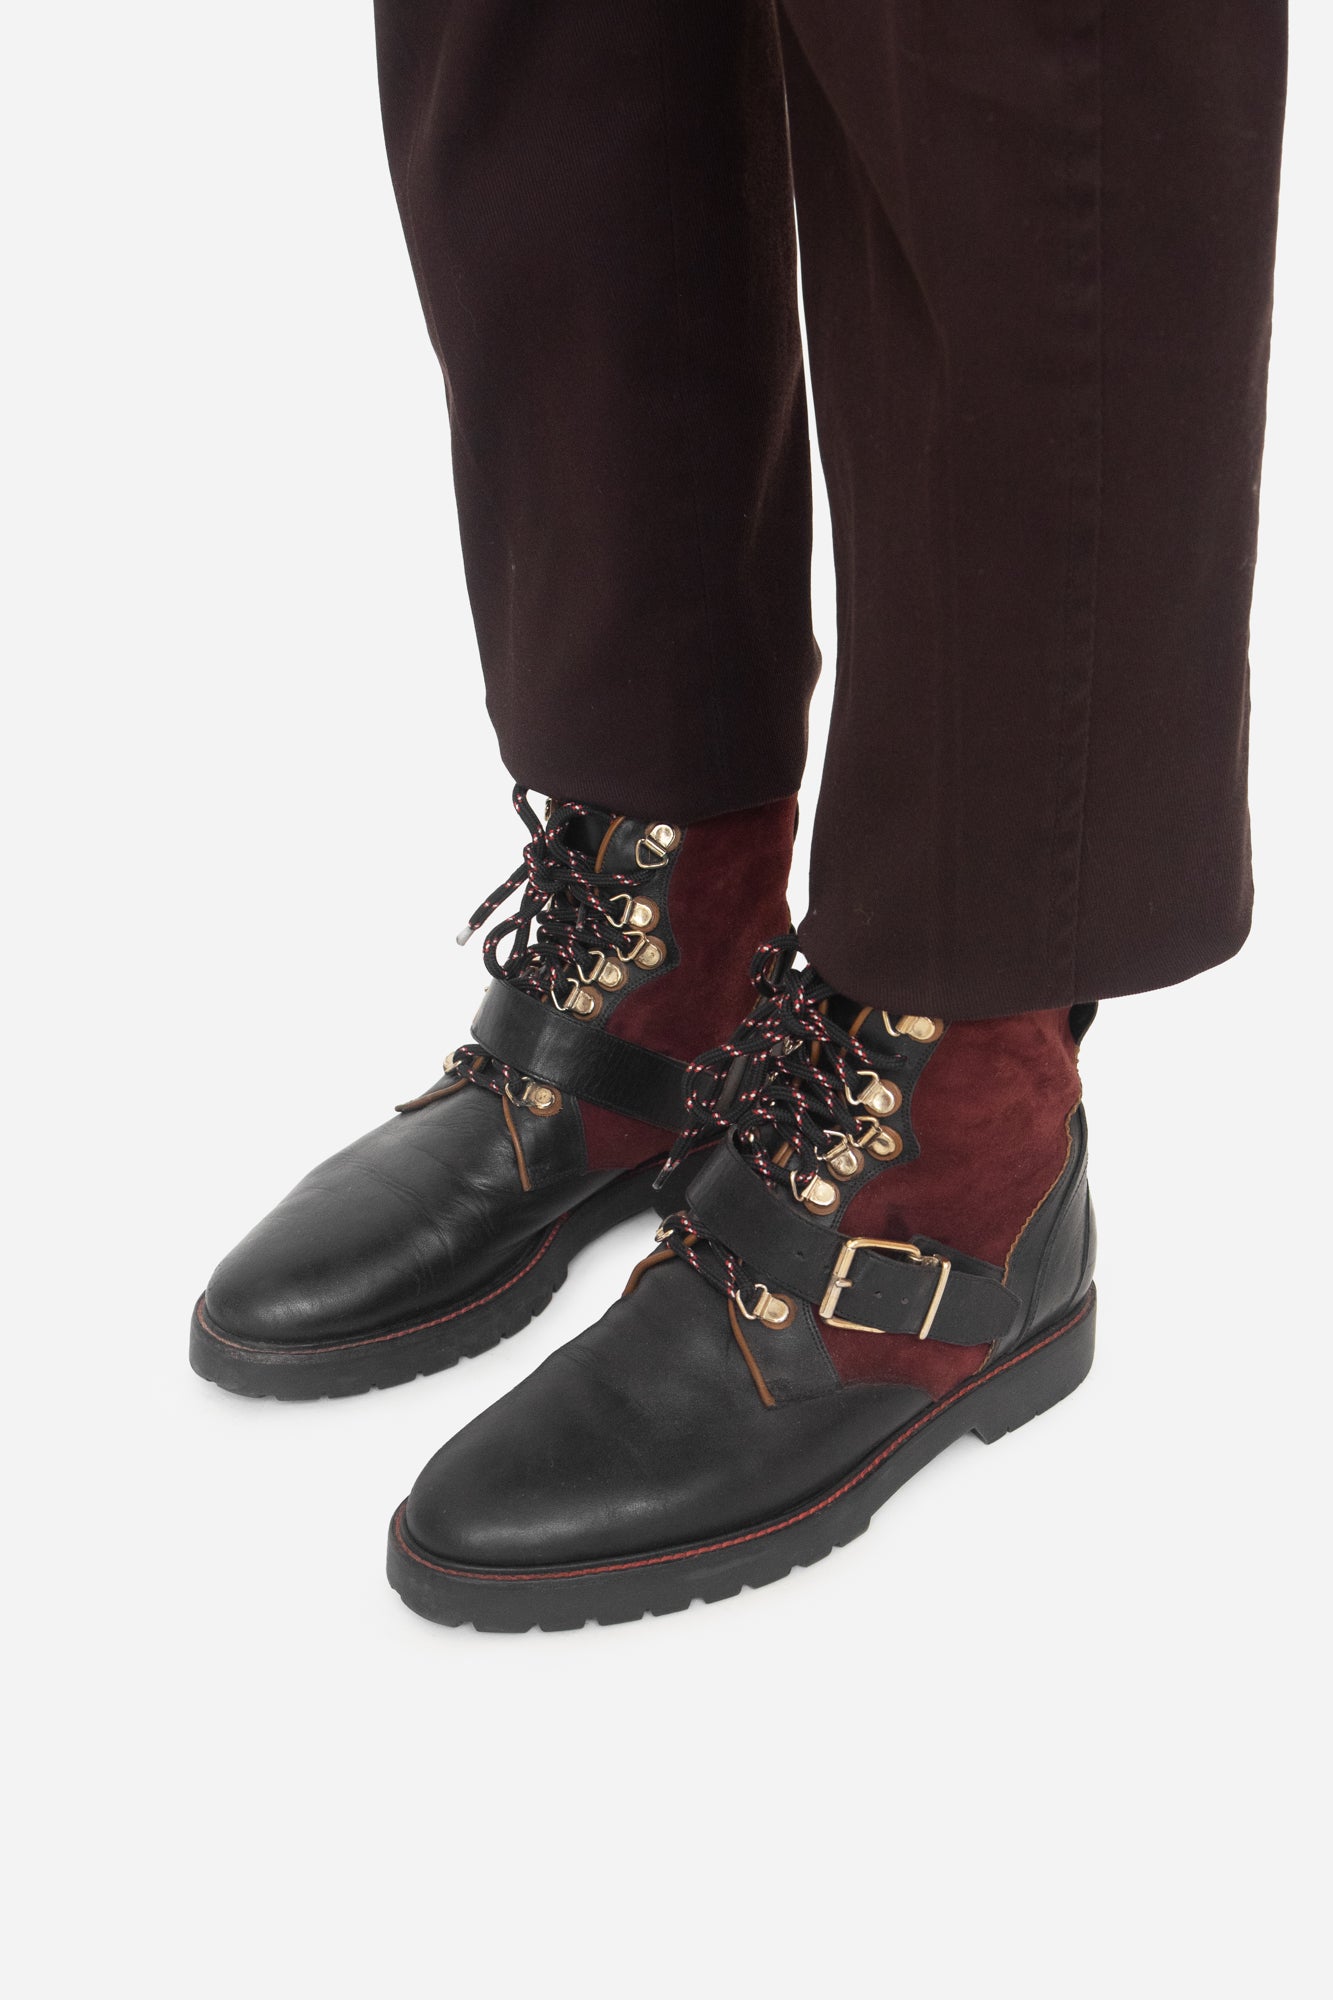 Burgundy Leather Color block Pattern Combat Boots suede/ leather